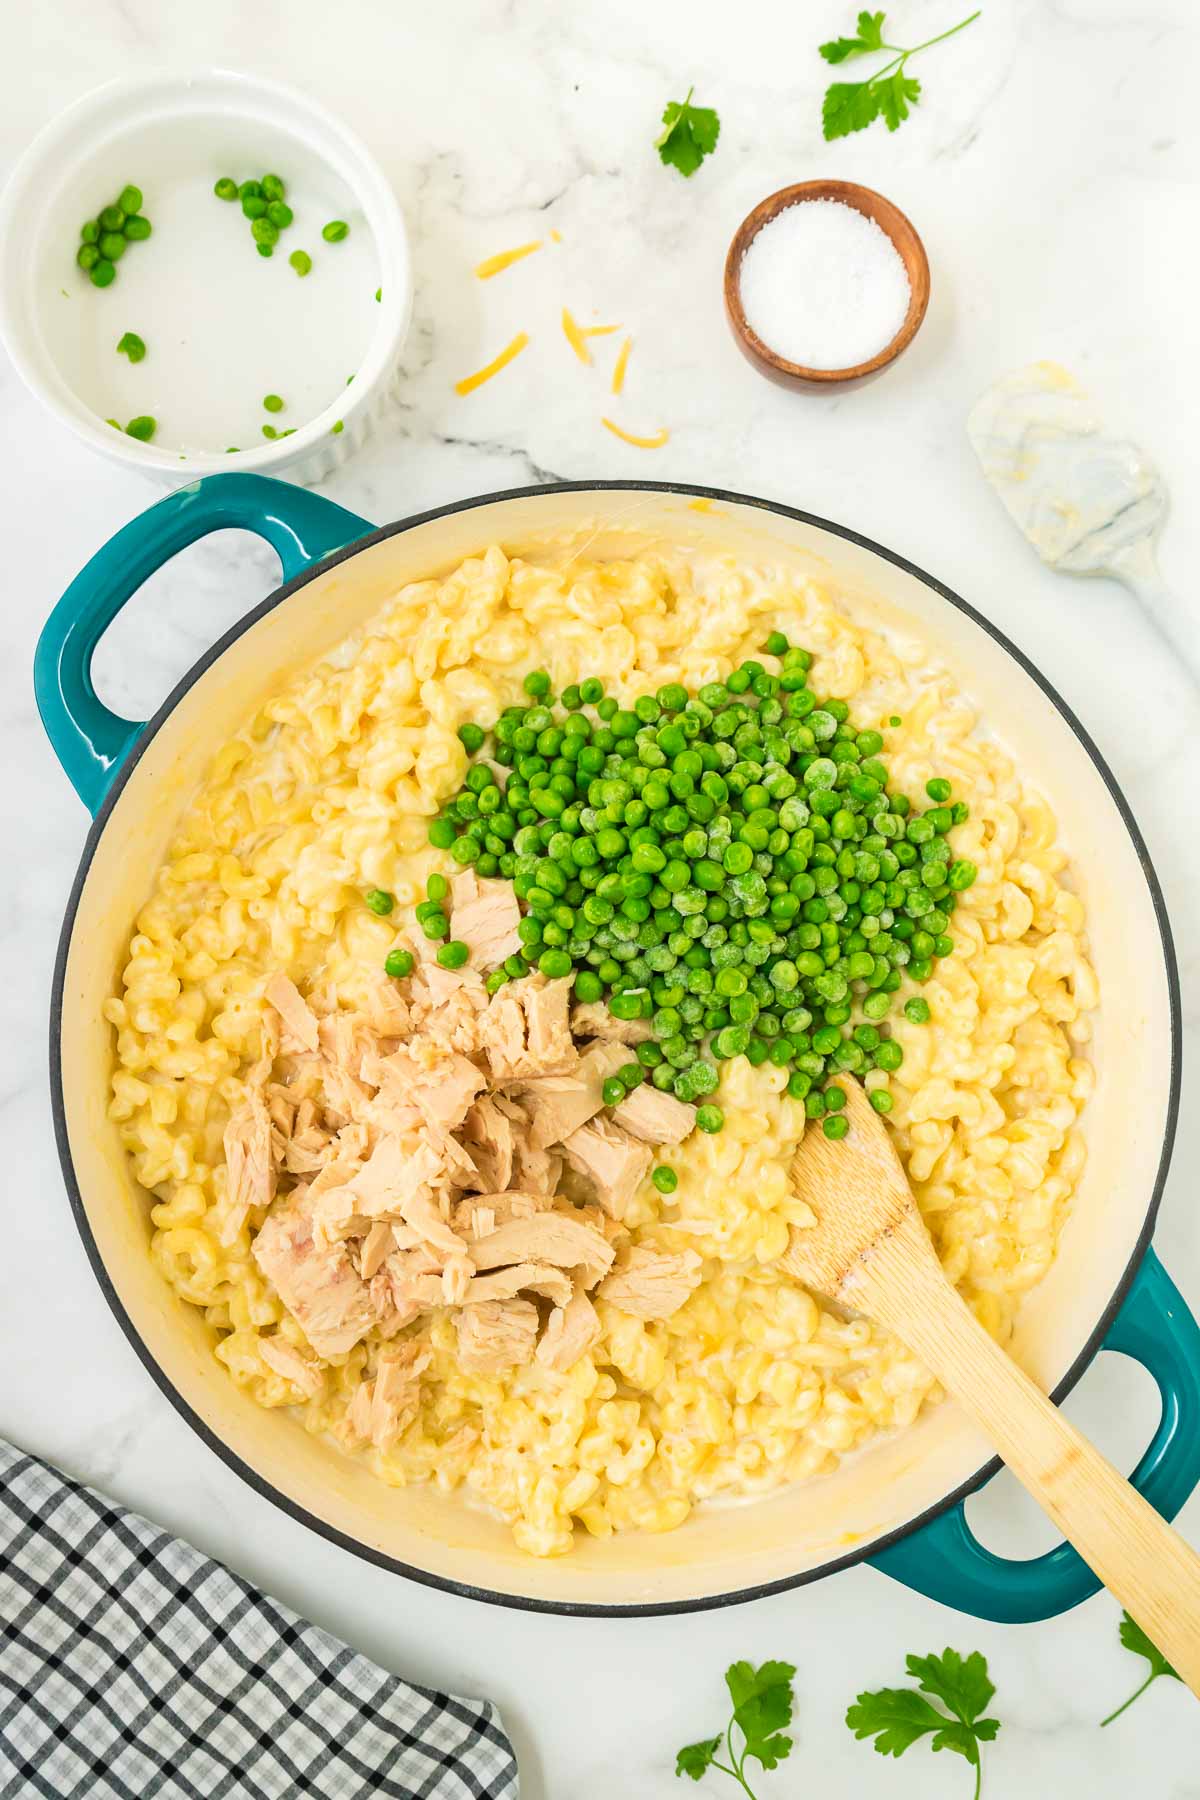 Tuna and peas being added to the mac and cheese.